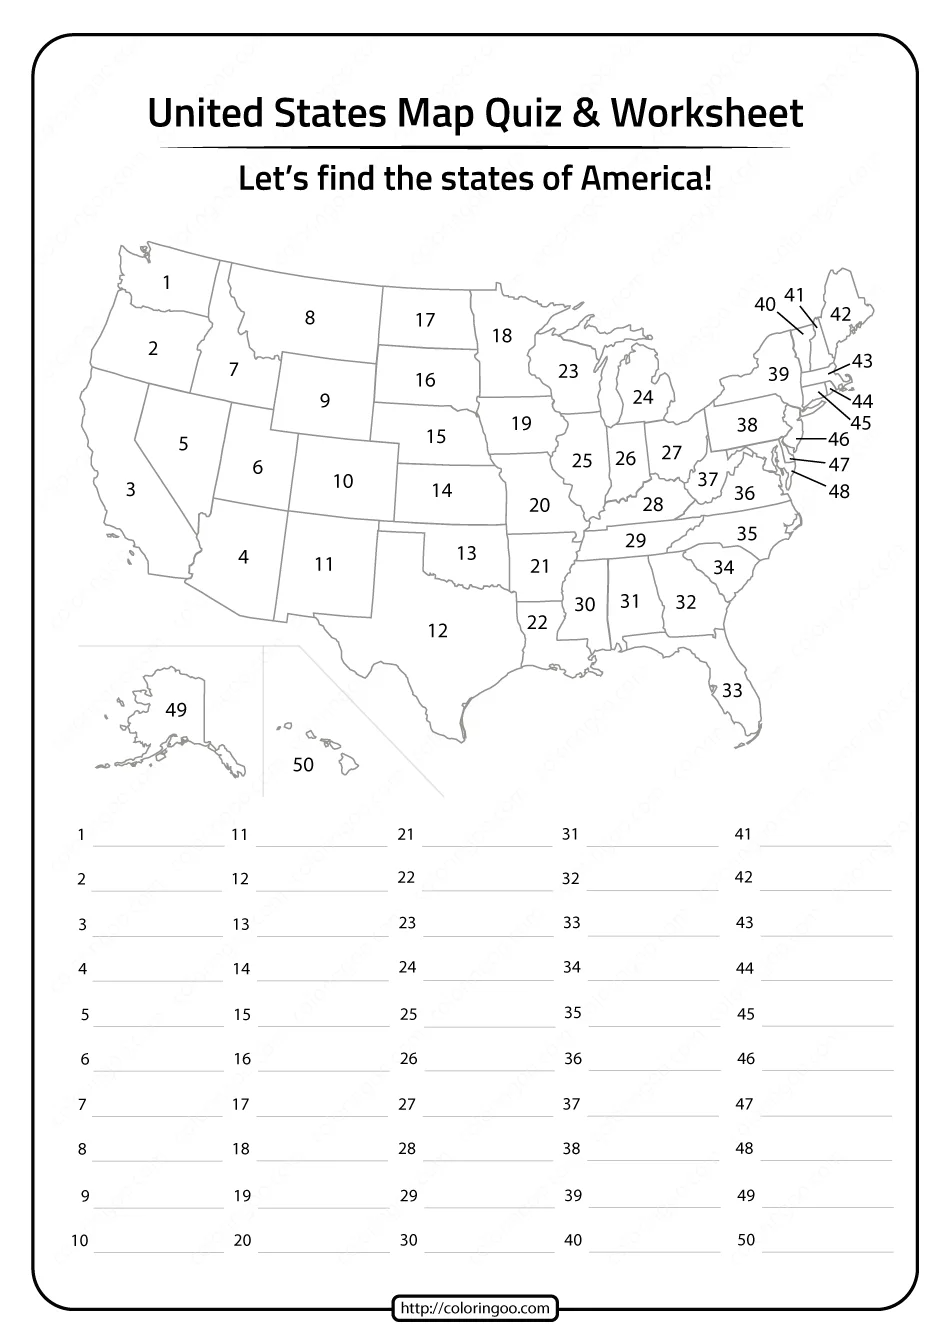 Free Printable United States Map Quiz And Worksheet 1 